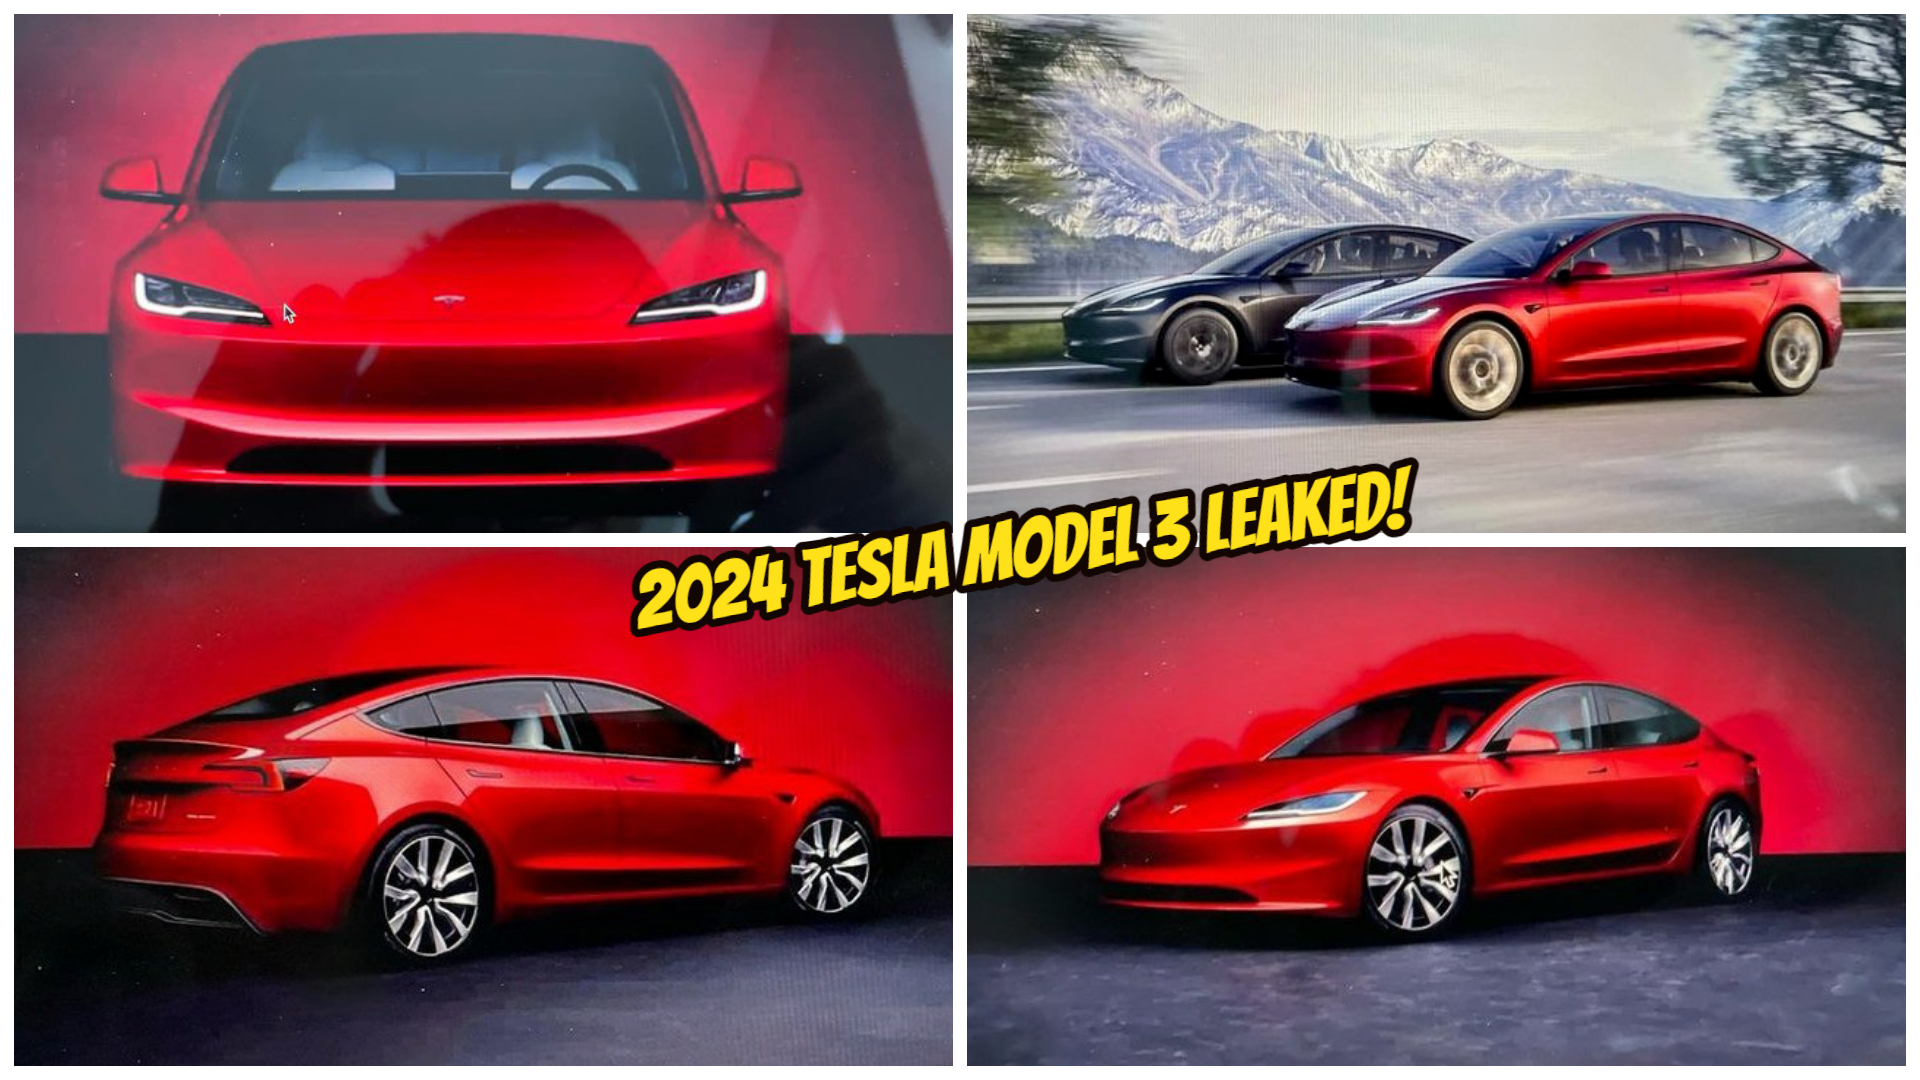 leaked-photos-show-the-2024-tesla-model-3-hours-before-the-alleged-official-introduction